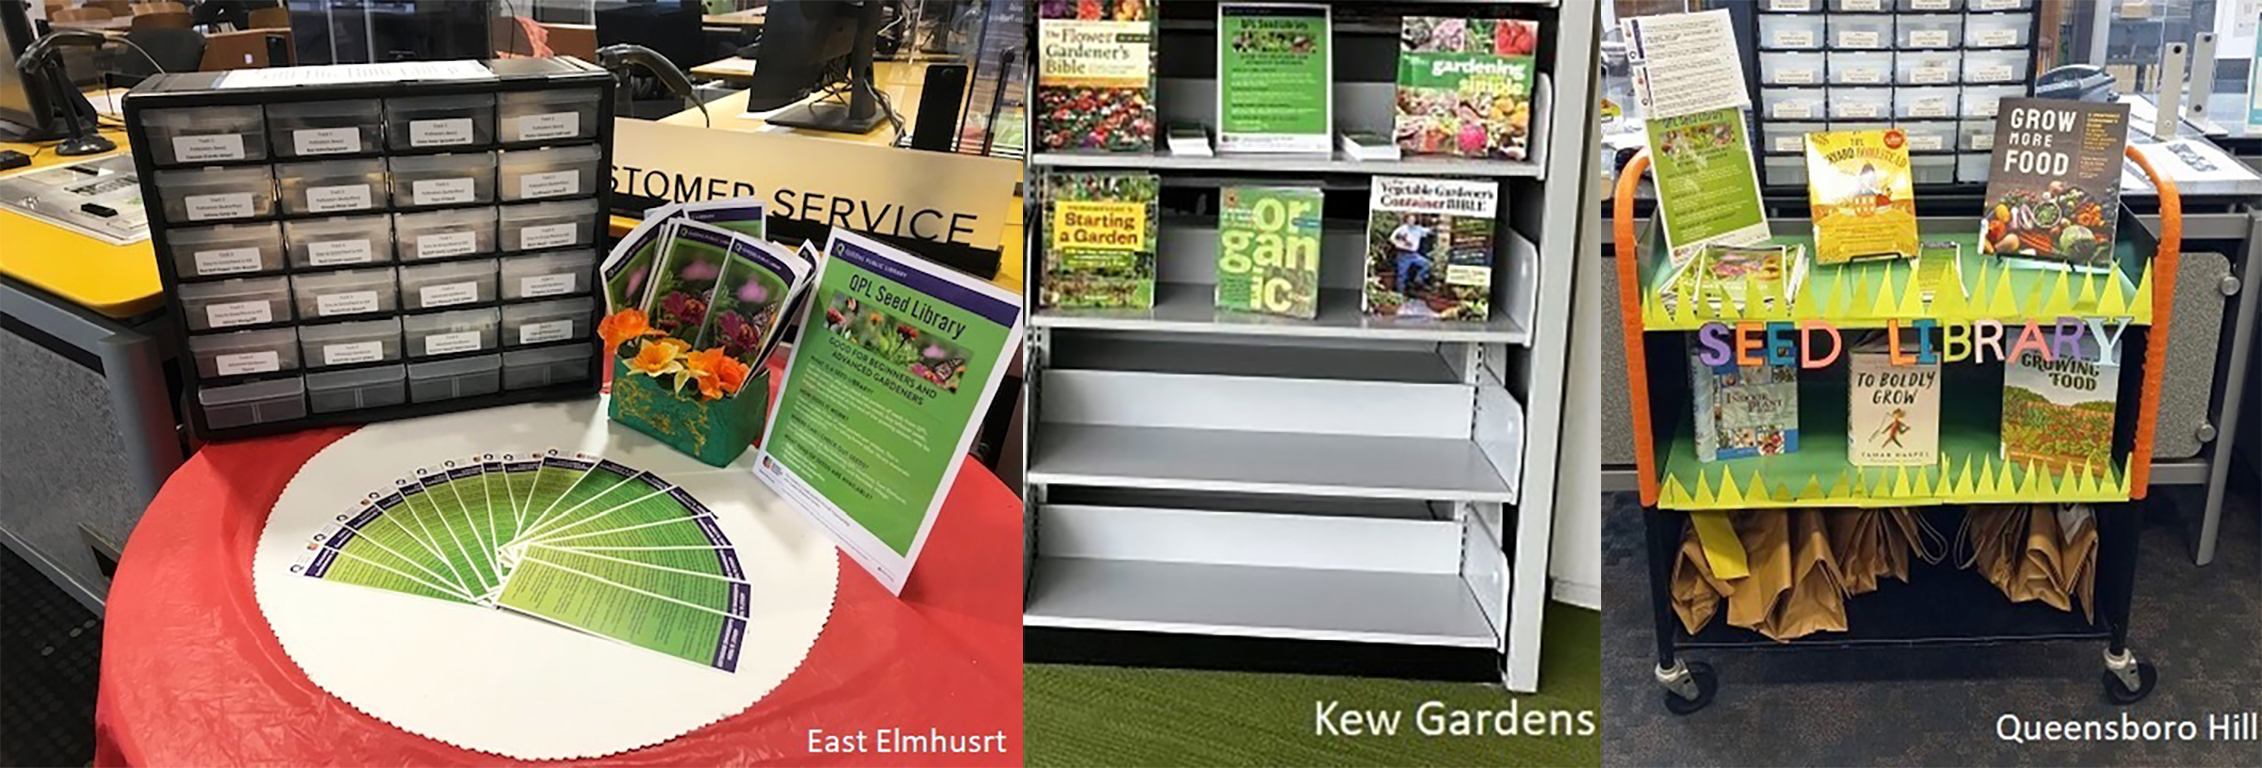 Pictures of QPL Seed Libraries at East Elmhurst, Kew Gardens Hills, and Queensboro Hill.